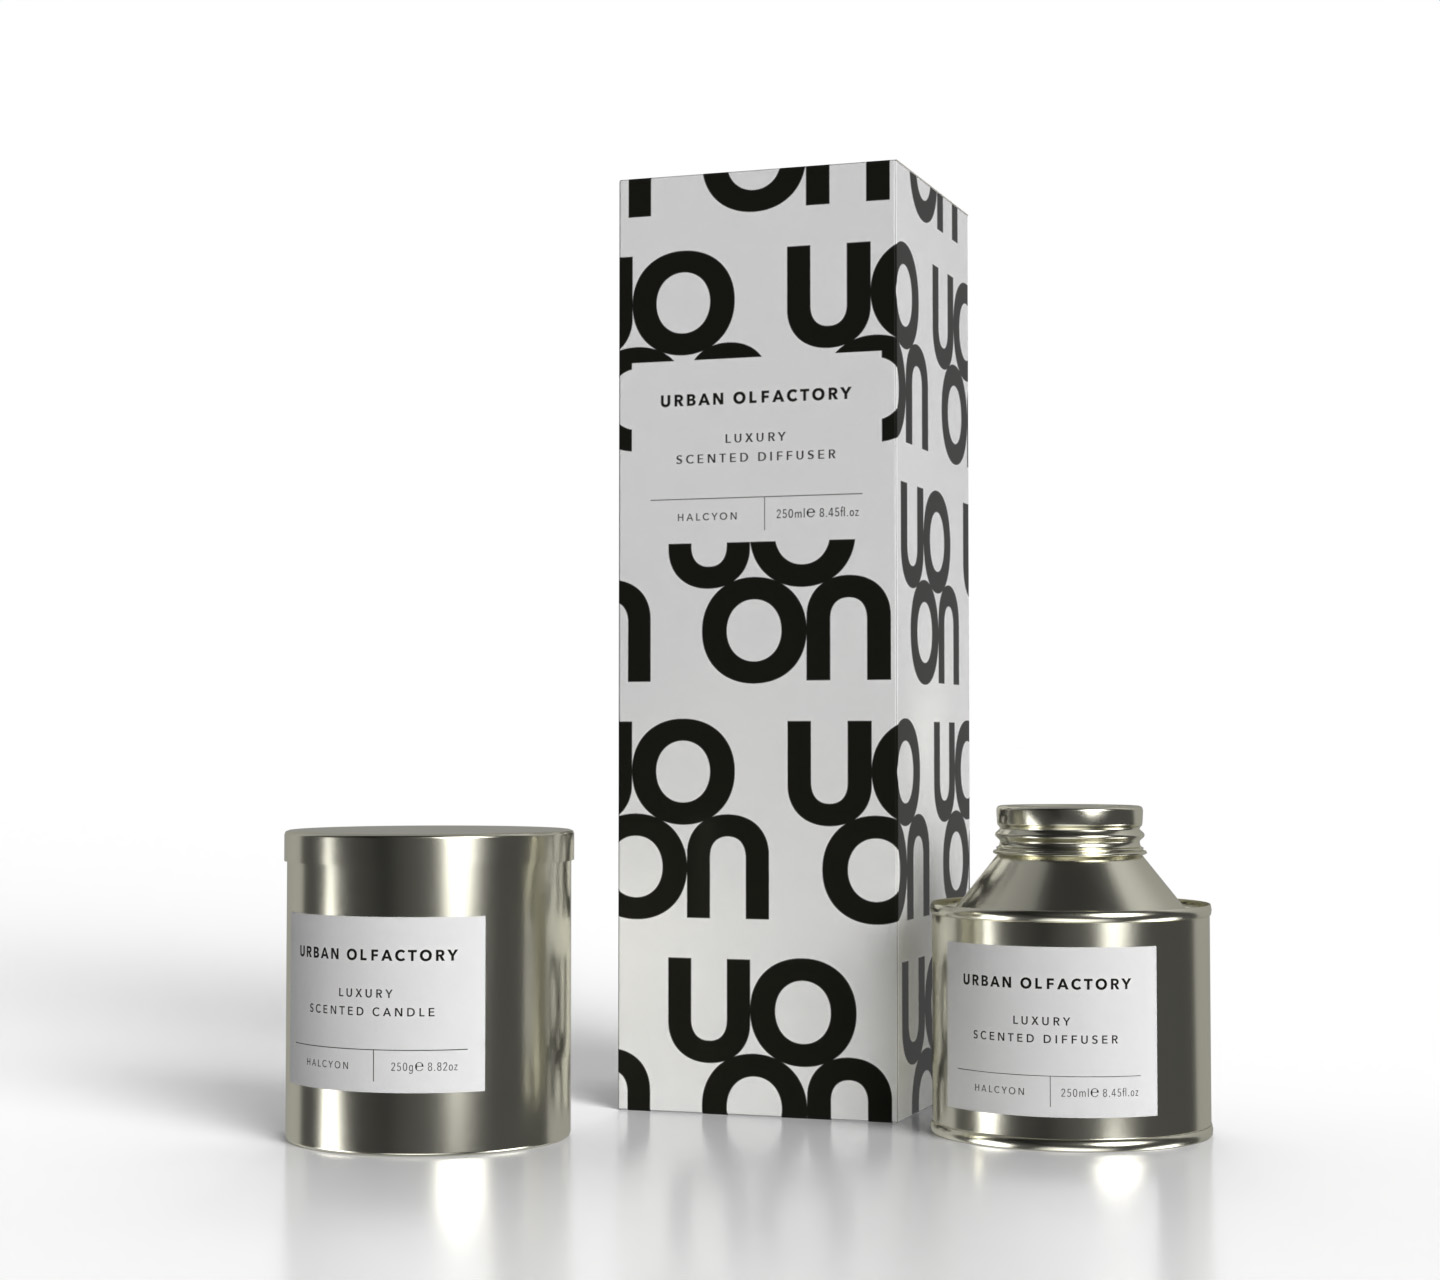 3D visual of candle tin and reed diffuser and related packaging.